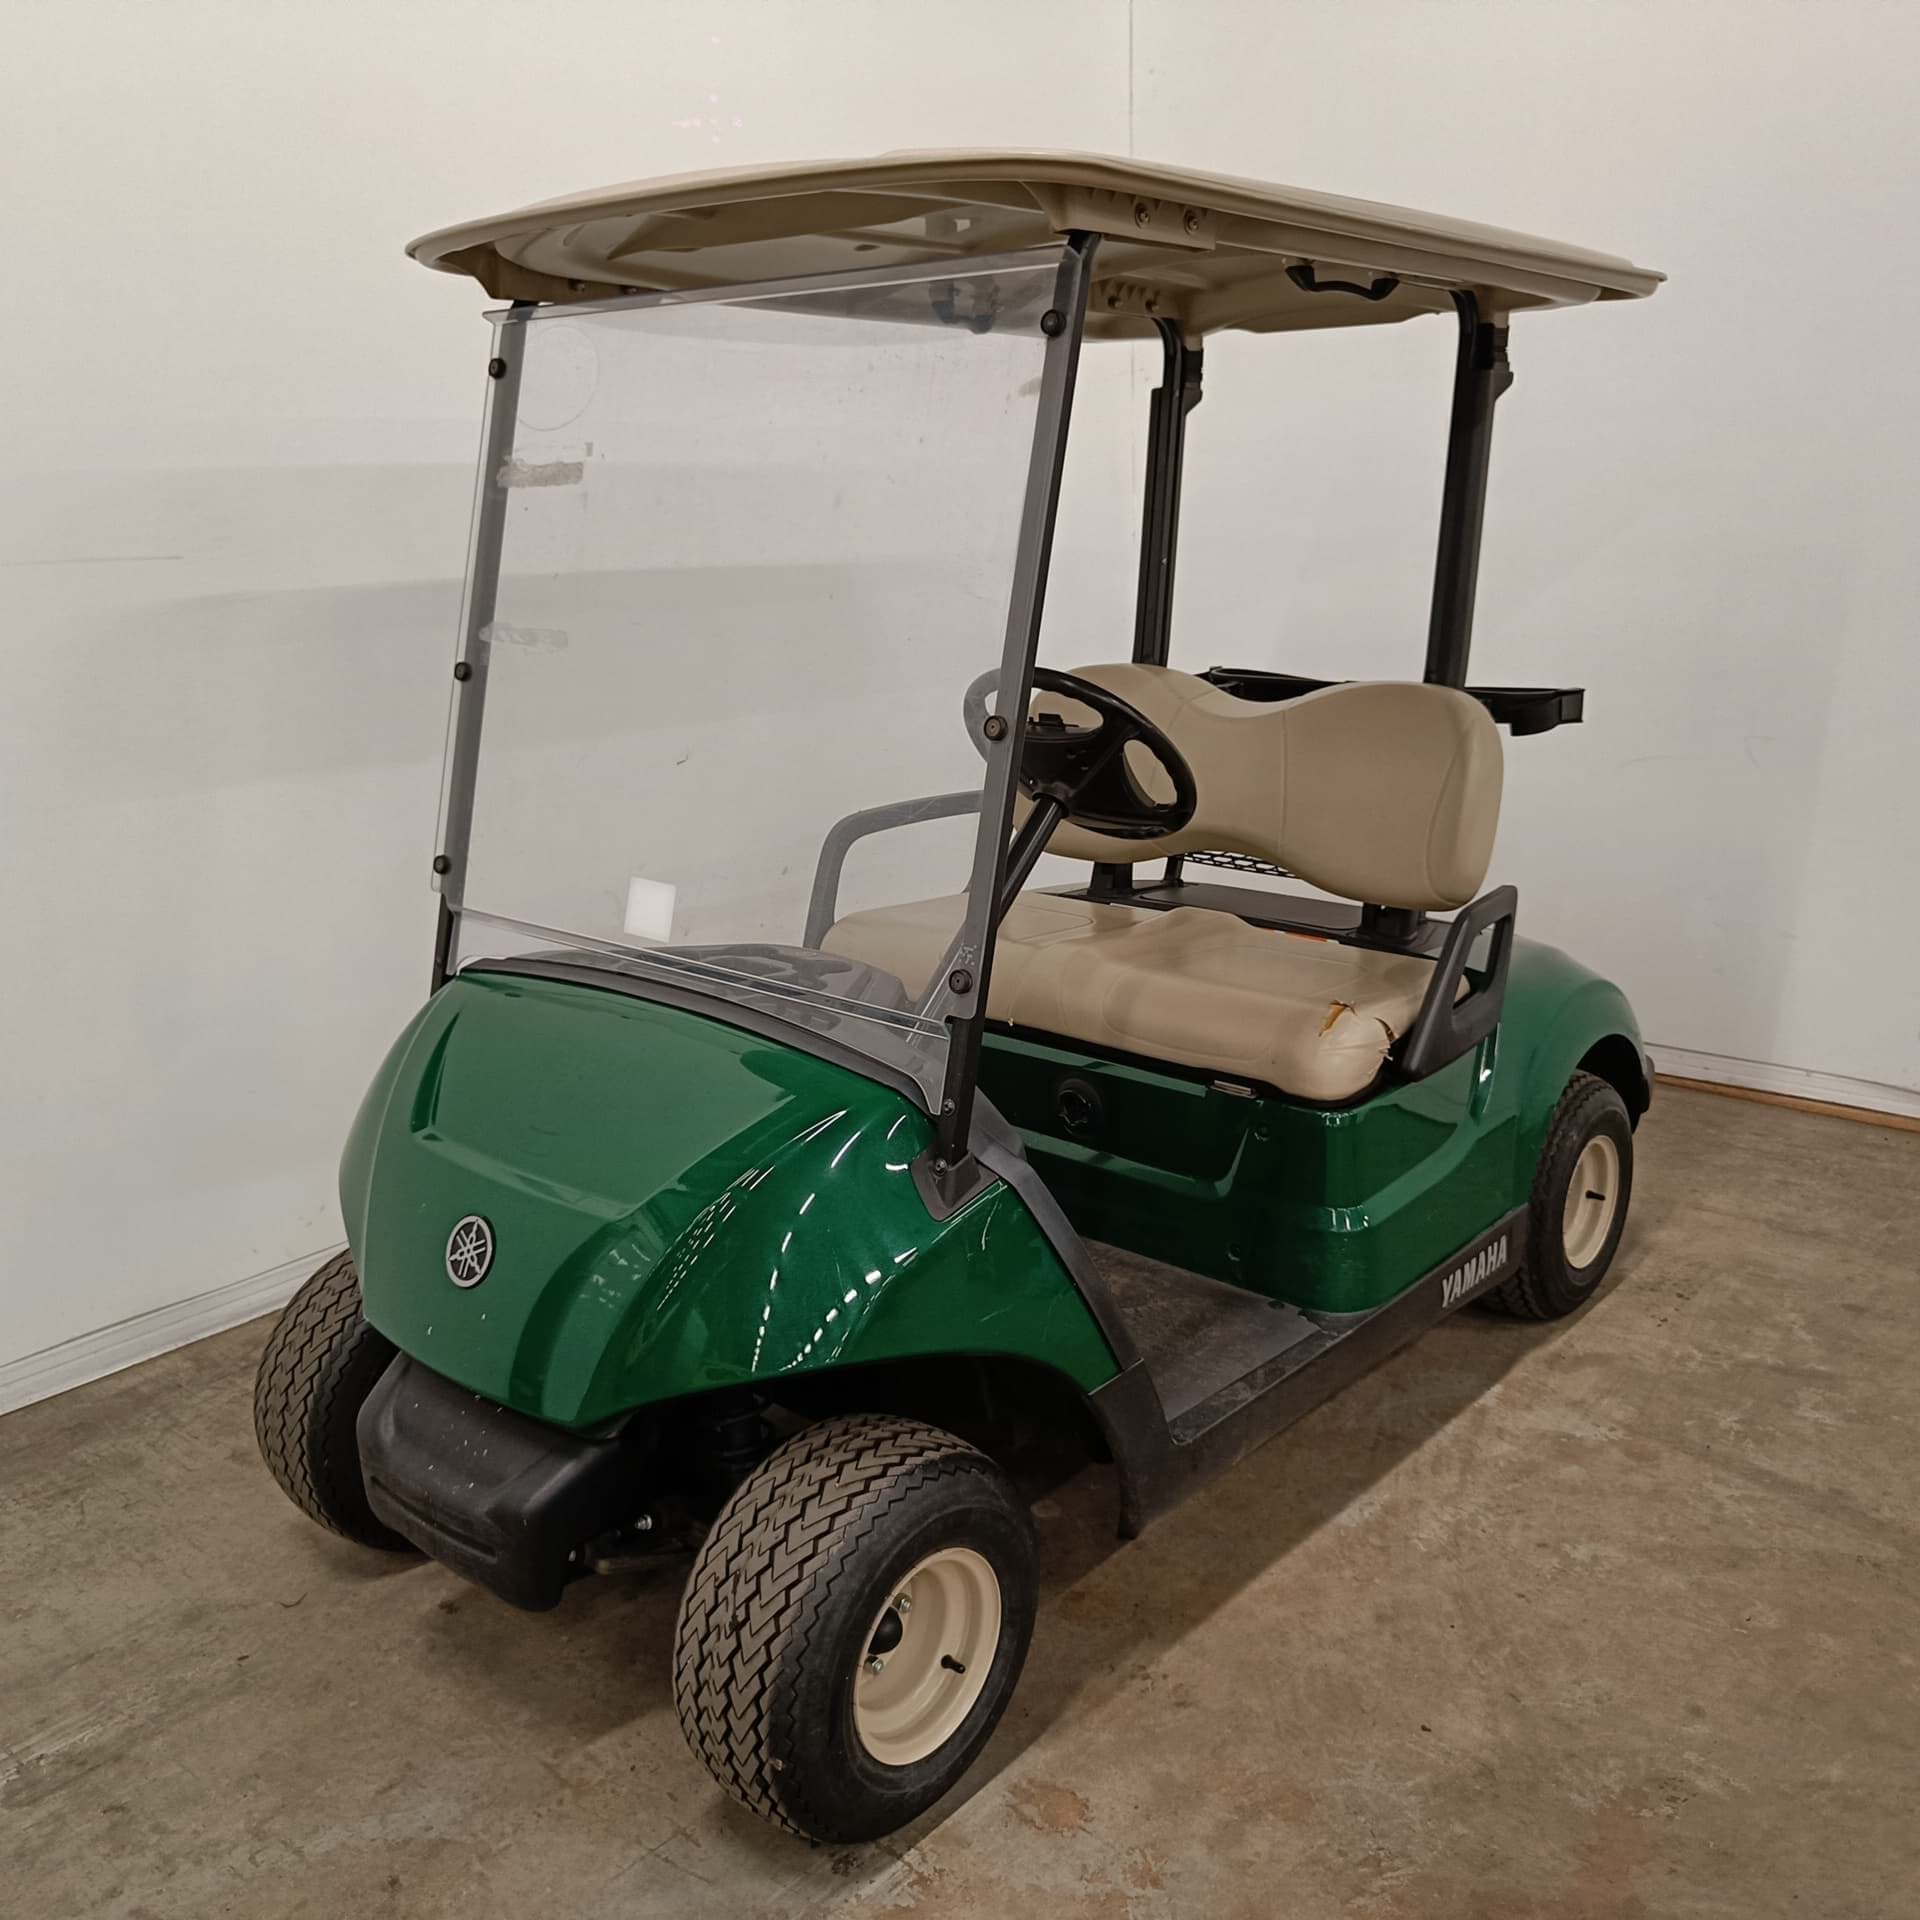 Picture of Trade - 2017 - Electric - Yamaha -  Drive2 - 2 Seater - Green